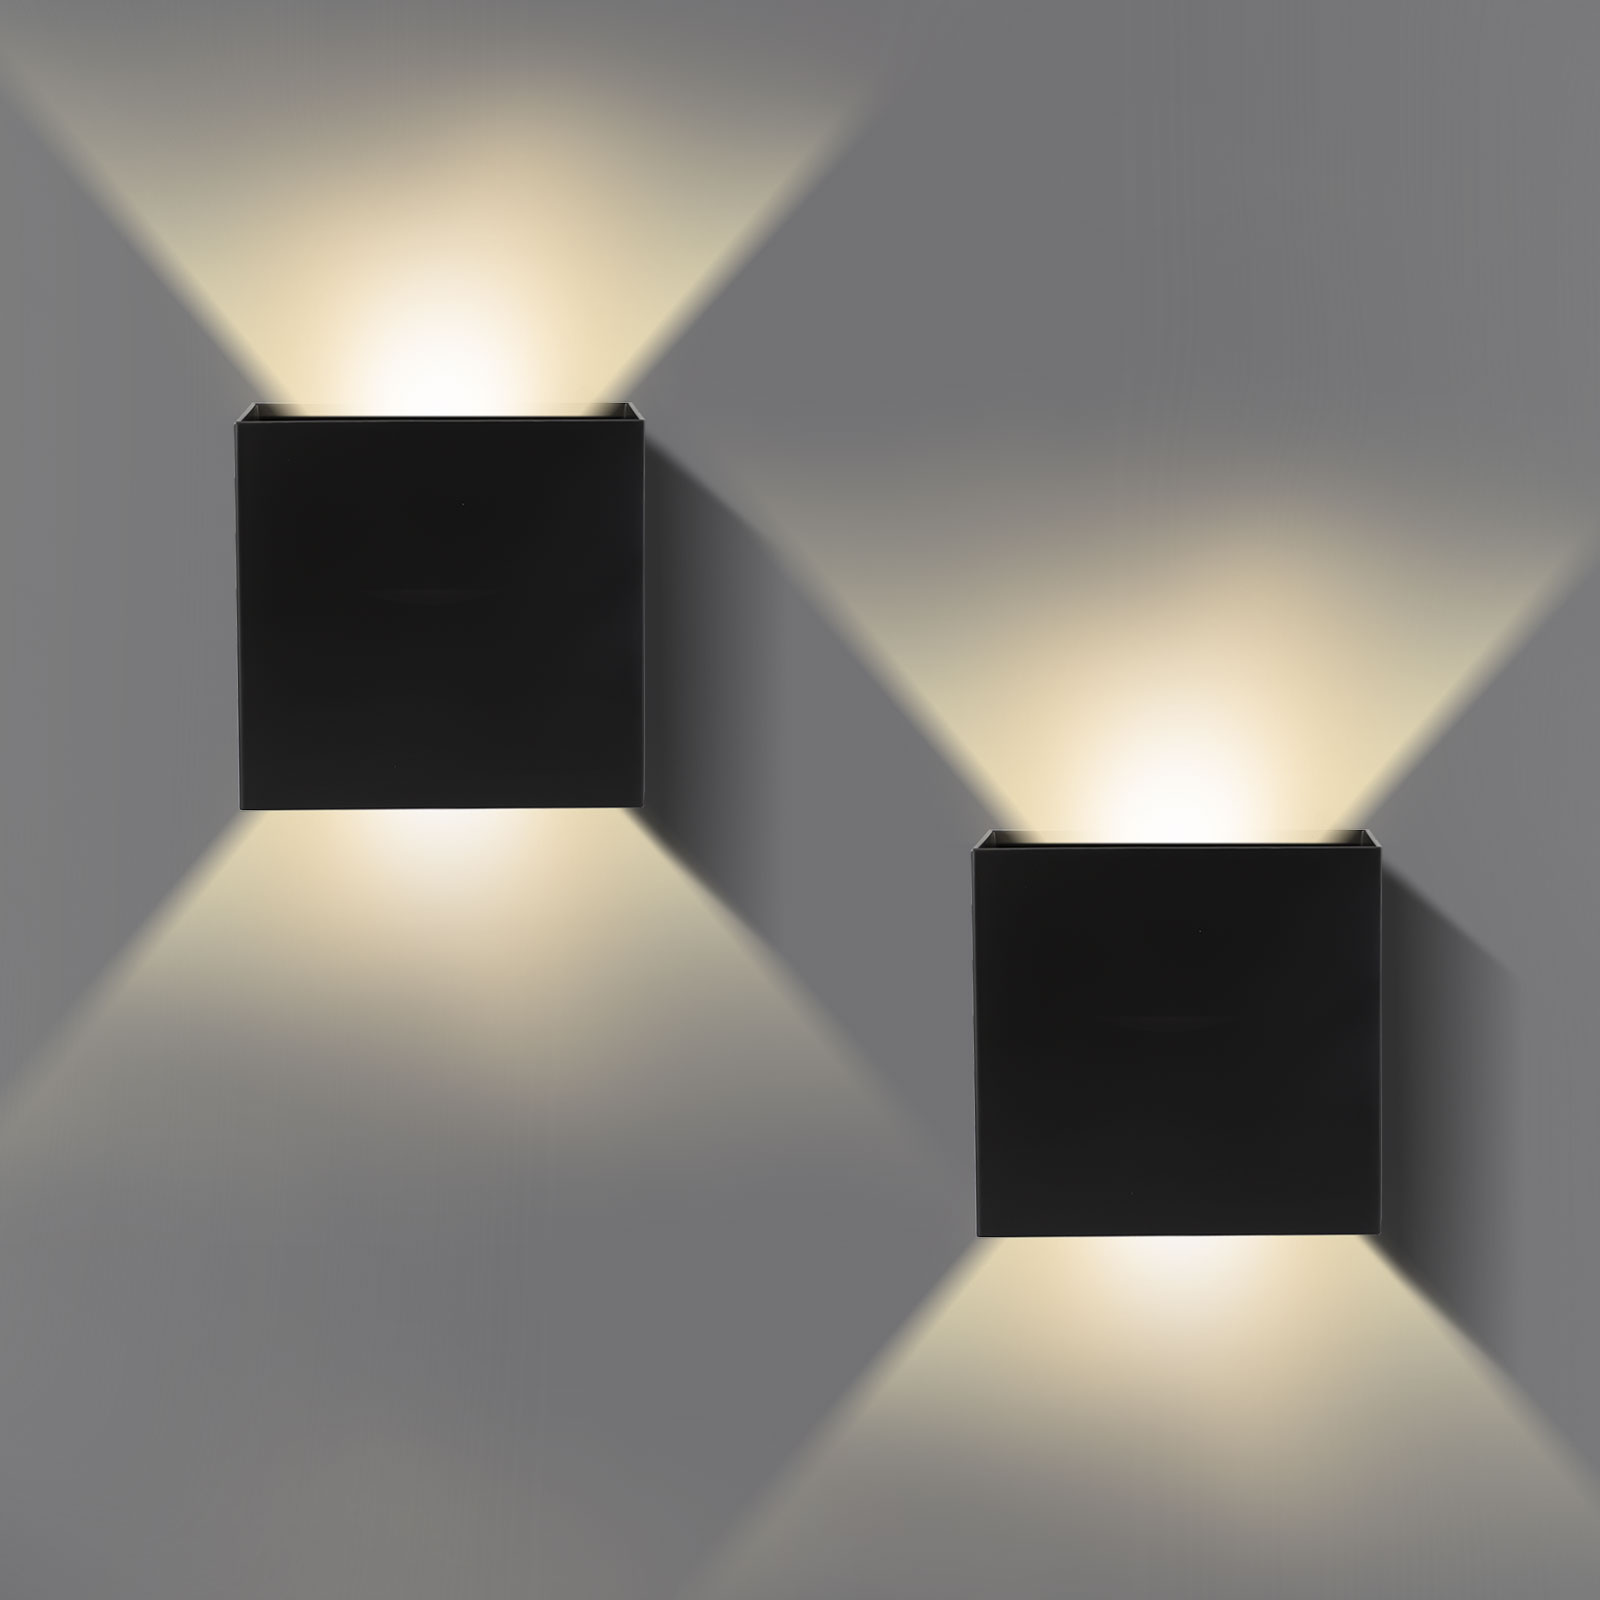 Details about   LED Wall Light Up Down Cube Indoor Outdoor Sconce Lighting Lamp Fixture Modern 